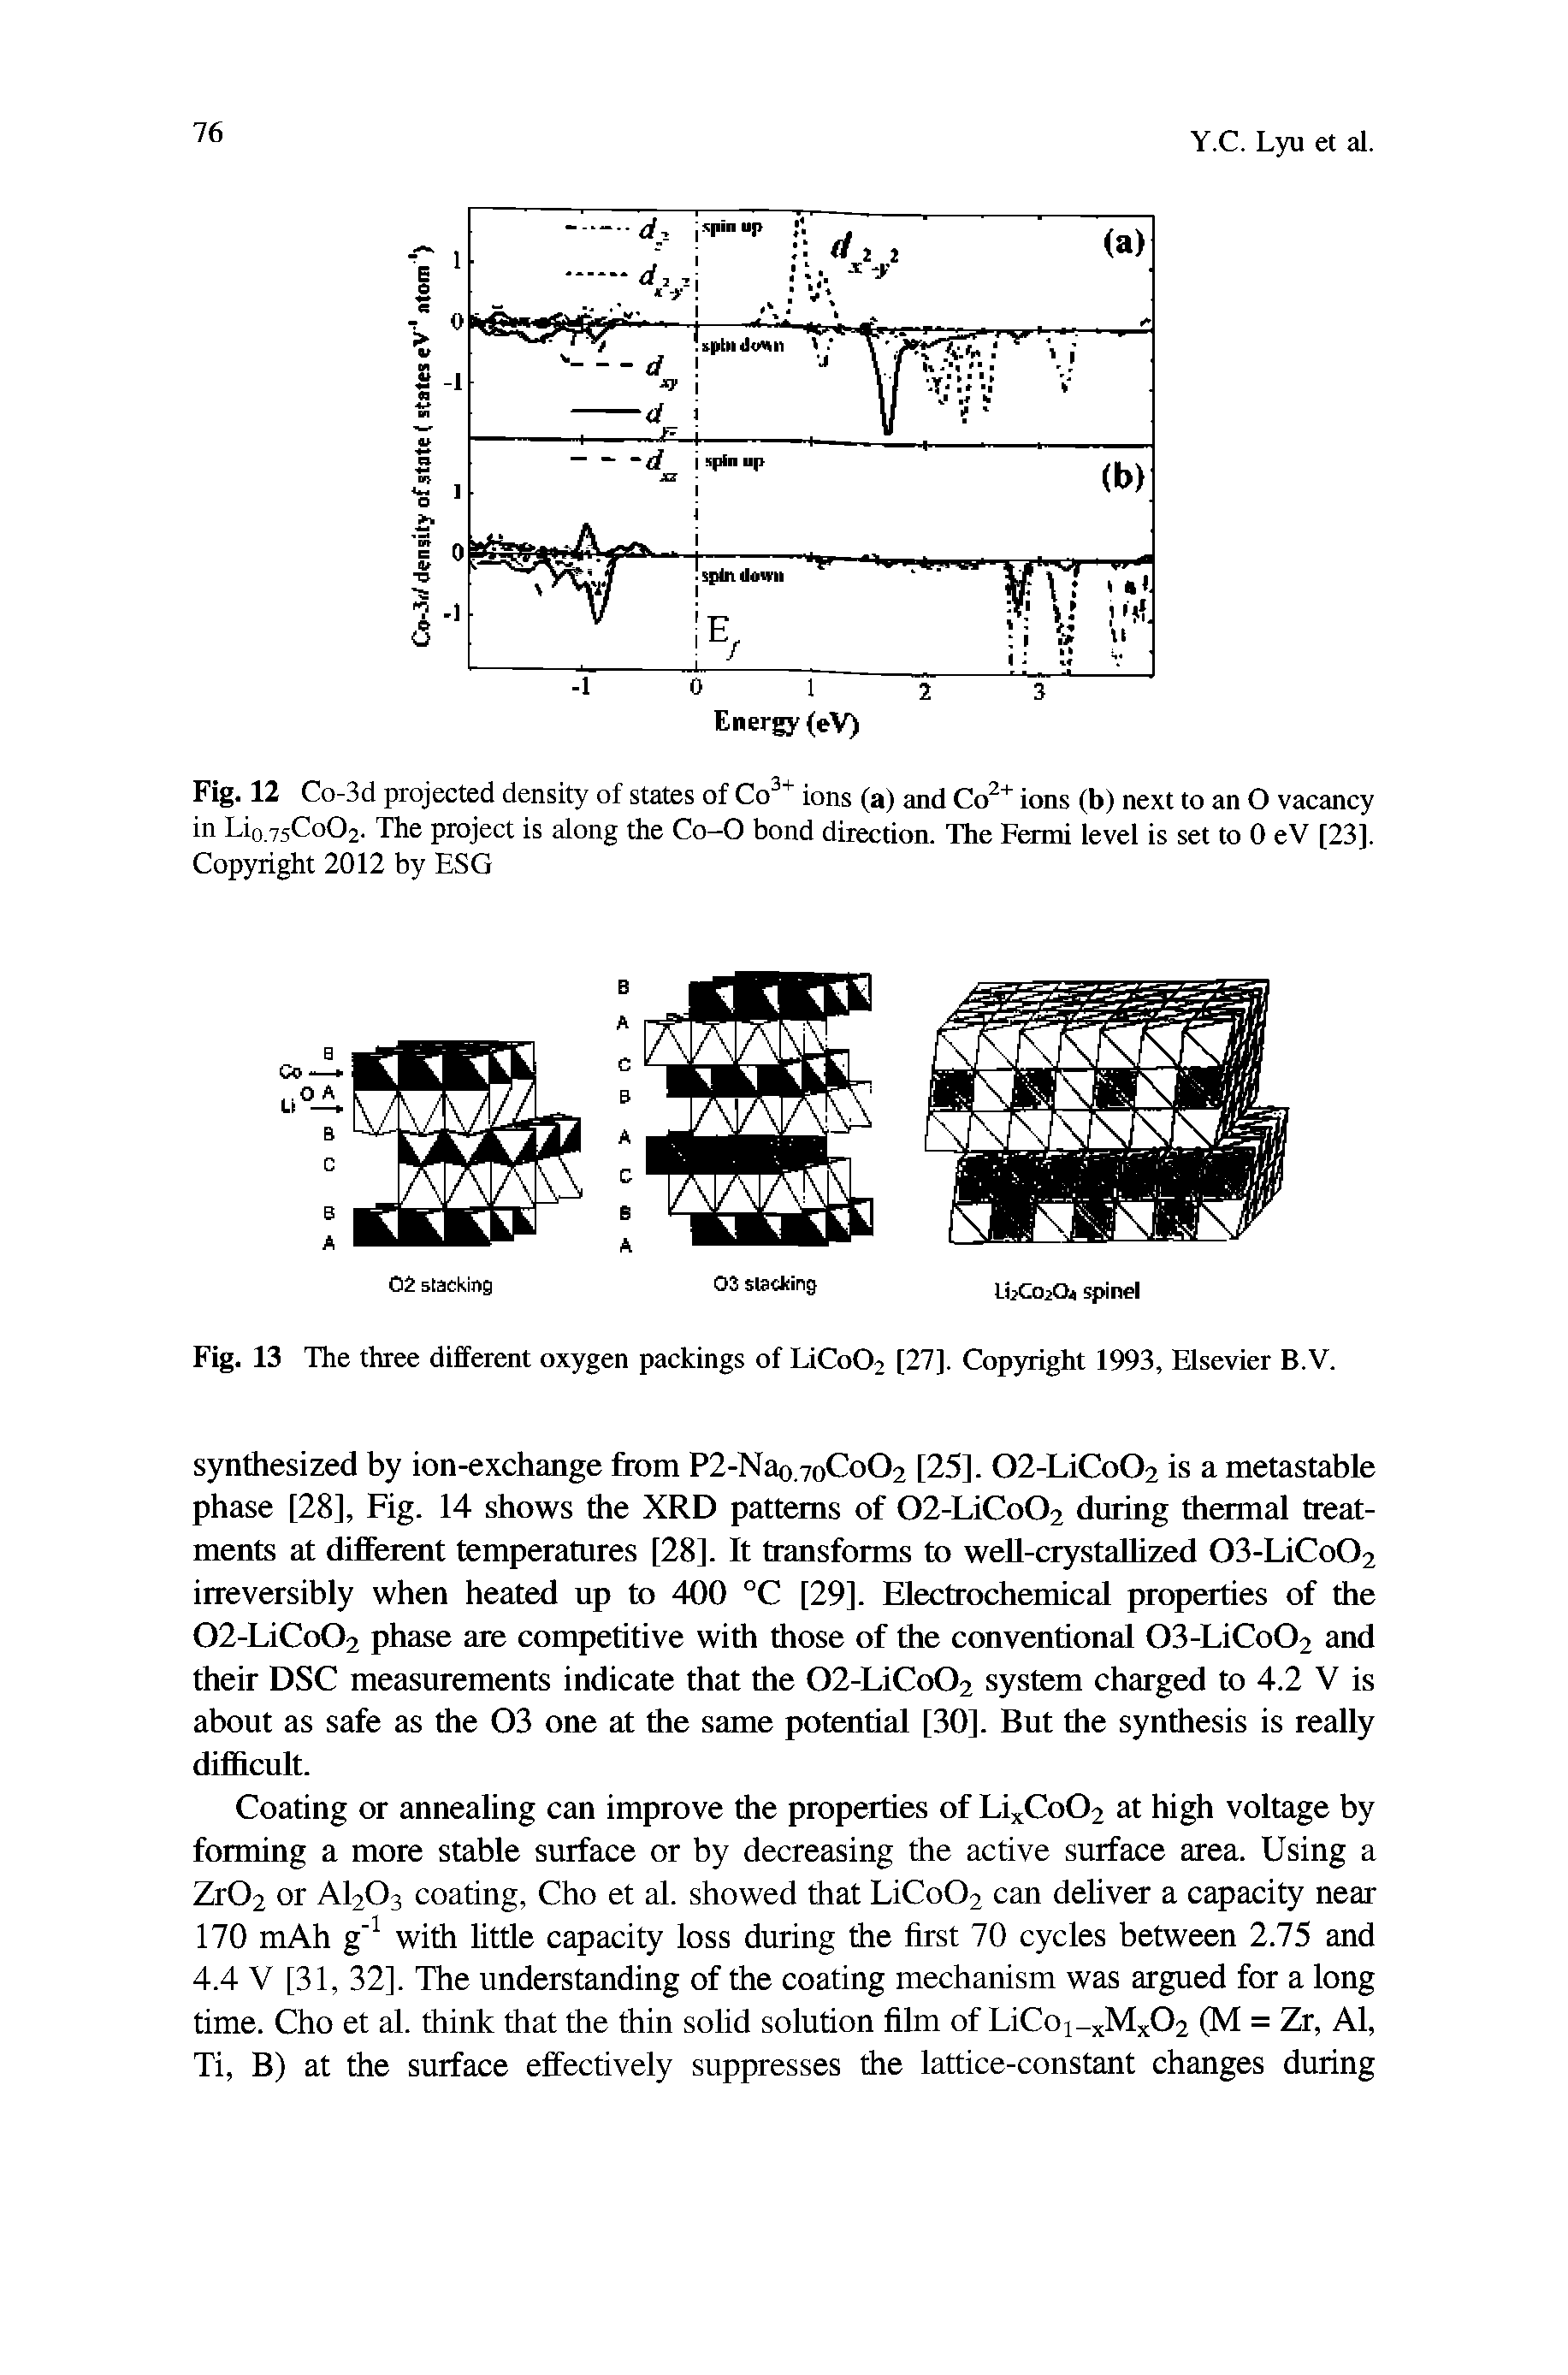 Fig. 13 The three different oxygen packings of LiCo02 [27]. Copyright 1993, Elsevier B.V.